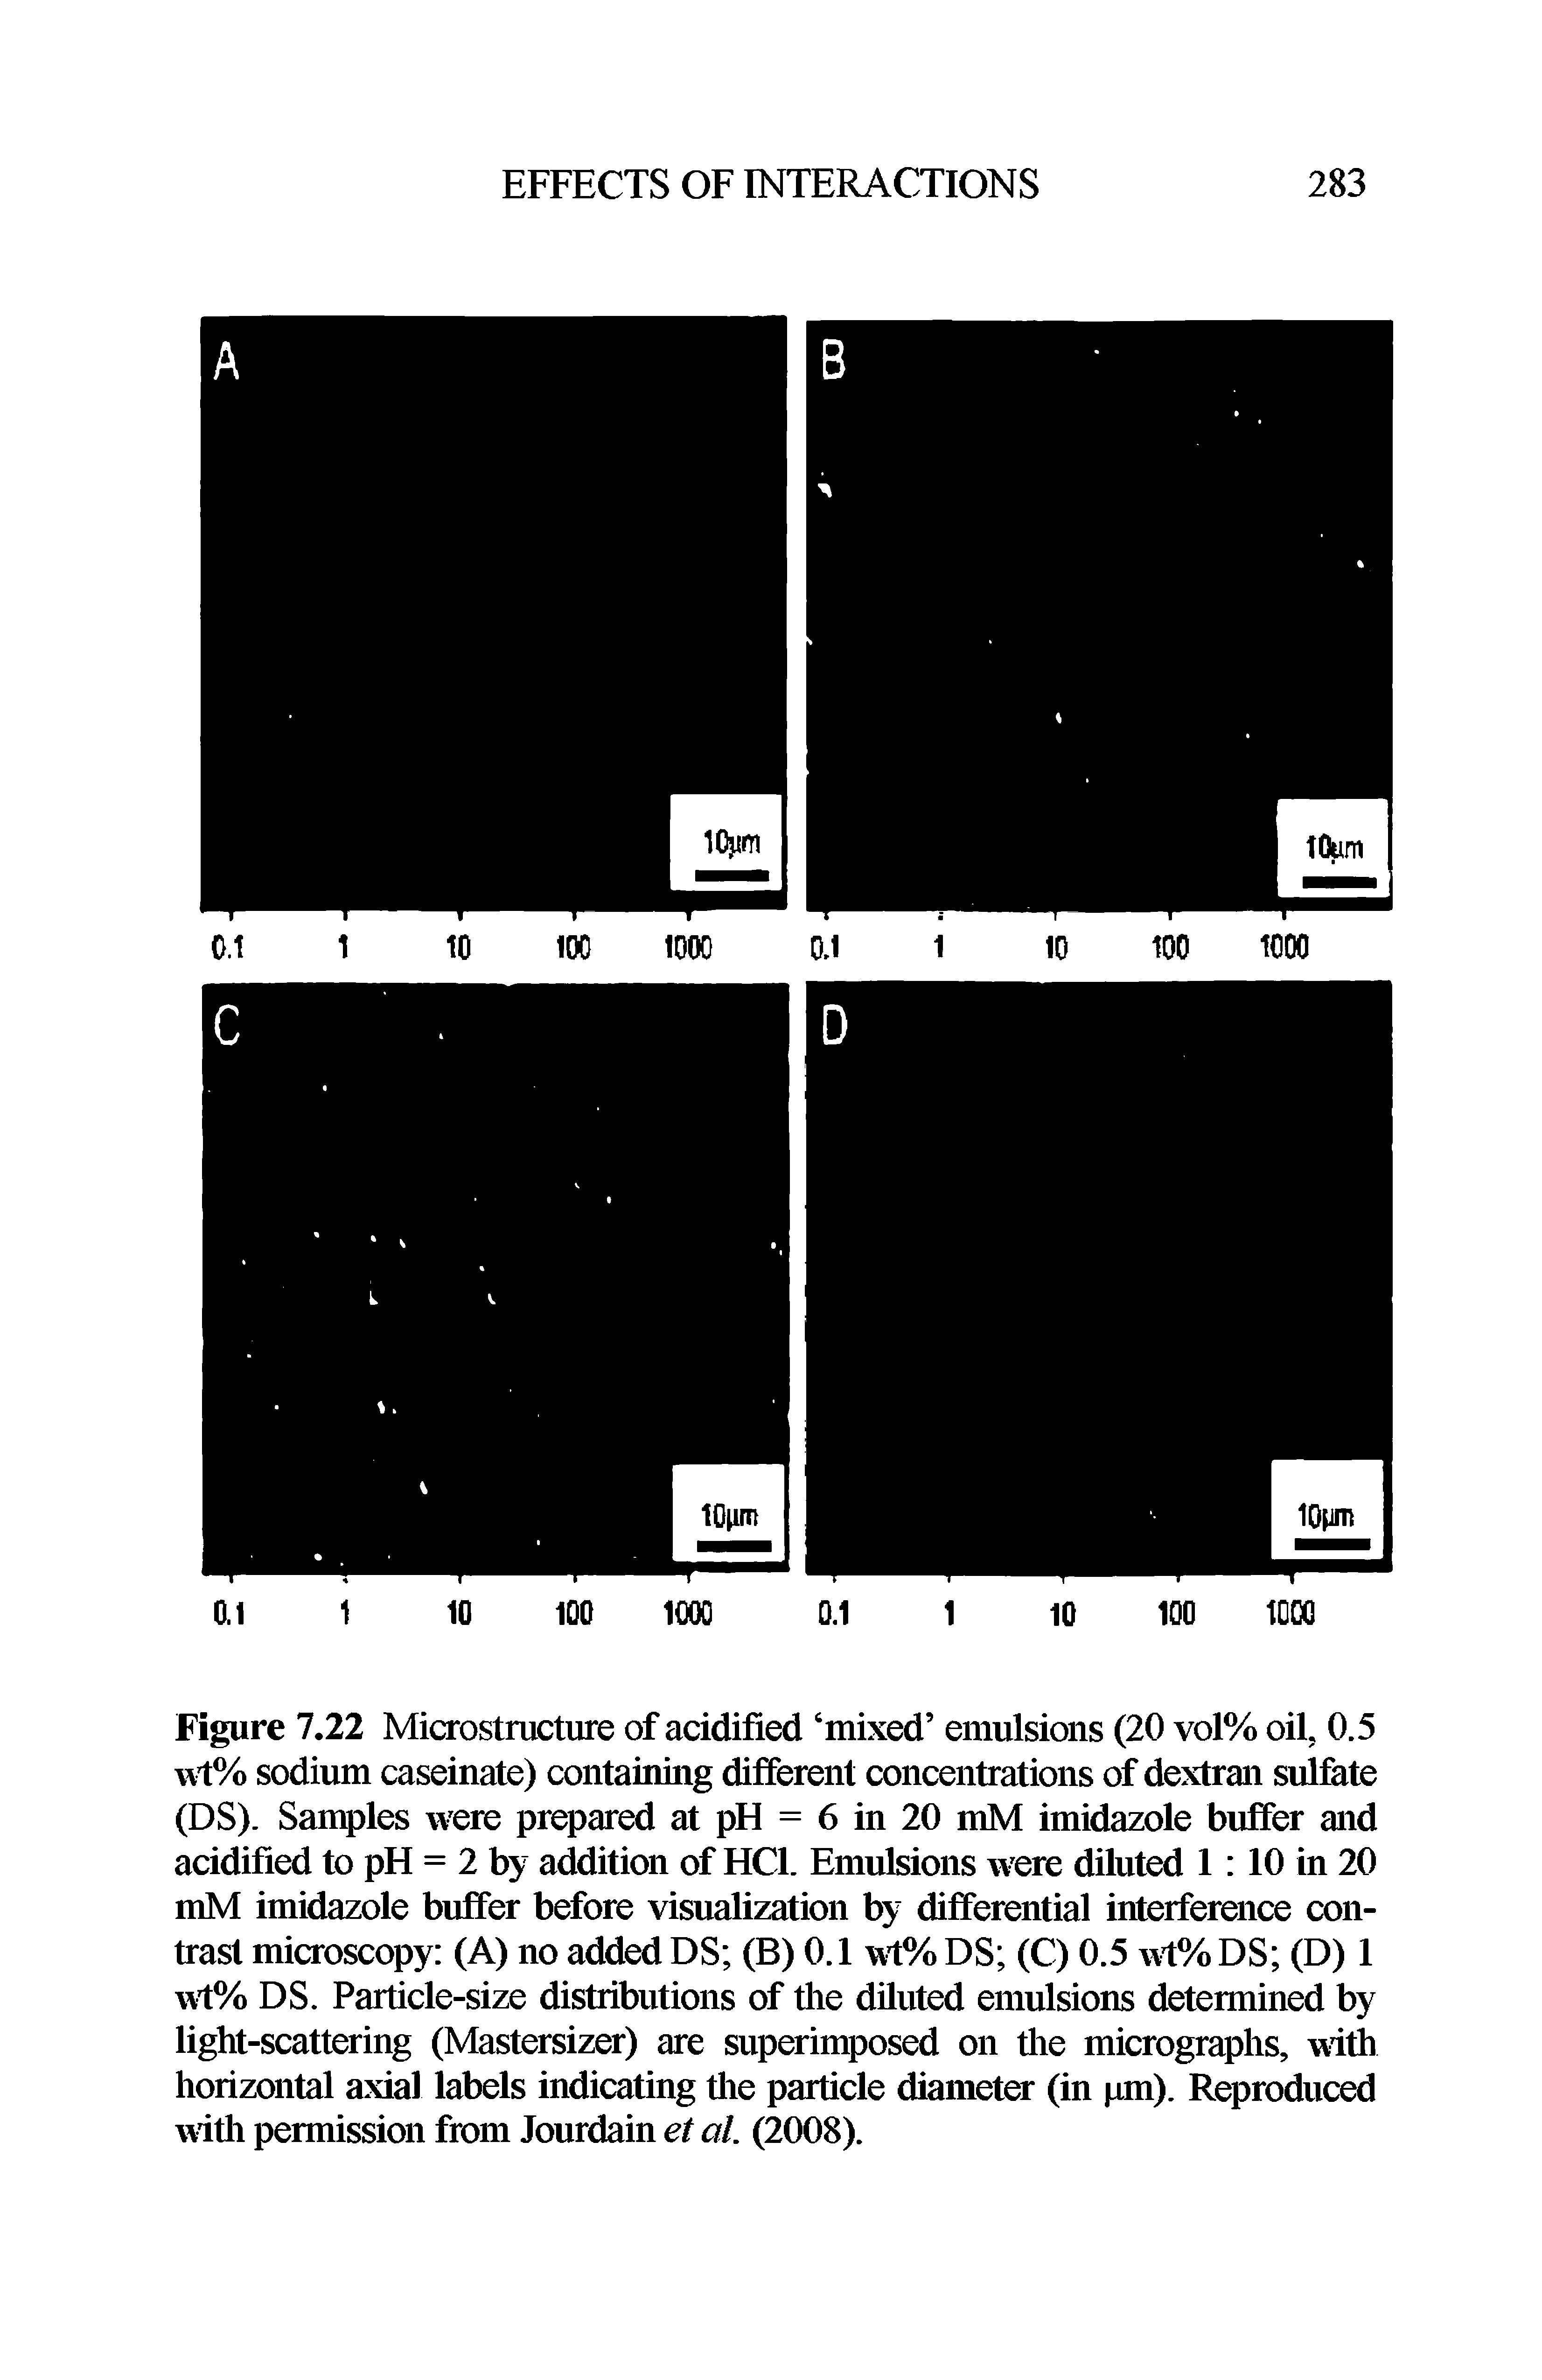 Figure 7.22 Microstructure of acidified mixed emulsions (20 vol% oil, 0.5 wt% sodium caseinate) containing different concentrations of dextran sulfate (DS). Samples were prepared at pH = 6 in 20 mM imidazole buffer and acidified to pH = 2 by addition of HCl. Emulsions were diluted 1 10 in 20 mM imidazole buffer before visualization by differential interference contrast microscopy (A) no added DS (B) 0.1 wt% DS (C) 0.5 wt% DS (D) 1 wt% DS. Particle-size distributions of the diluted emulsions determined by light-scattering (Mastersizer) are superimposed on the micrographs, with horizontal axial labels indicating the particle diameter (in pm). Reproduced with permission from Jourdain et al. (2008).